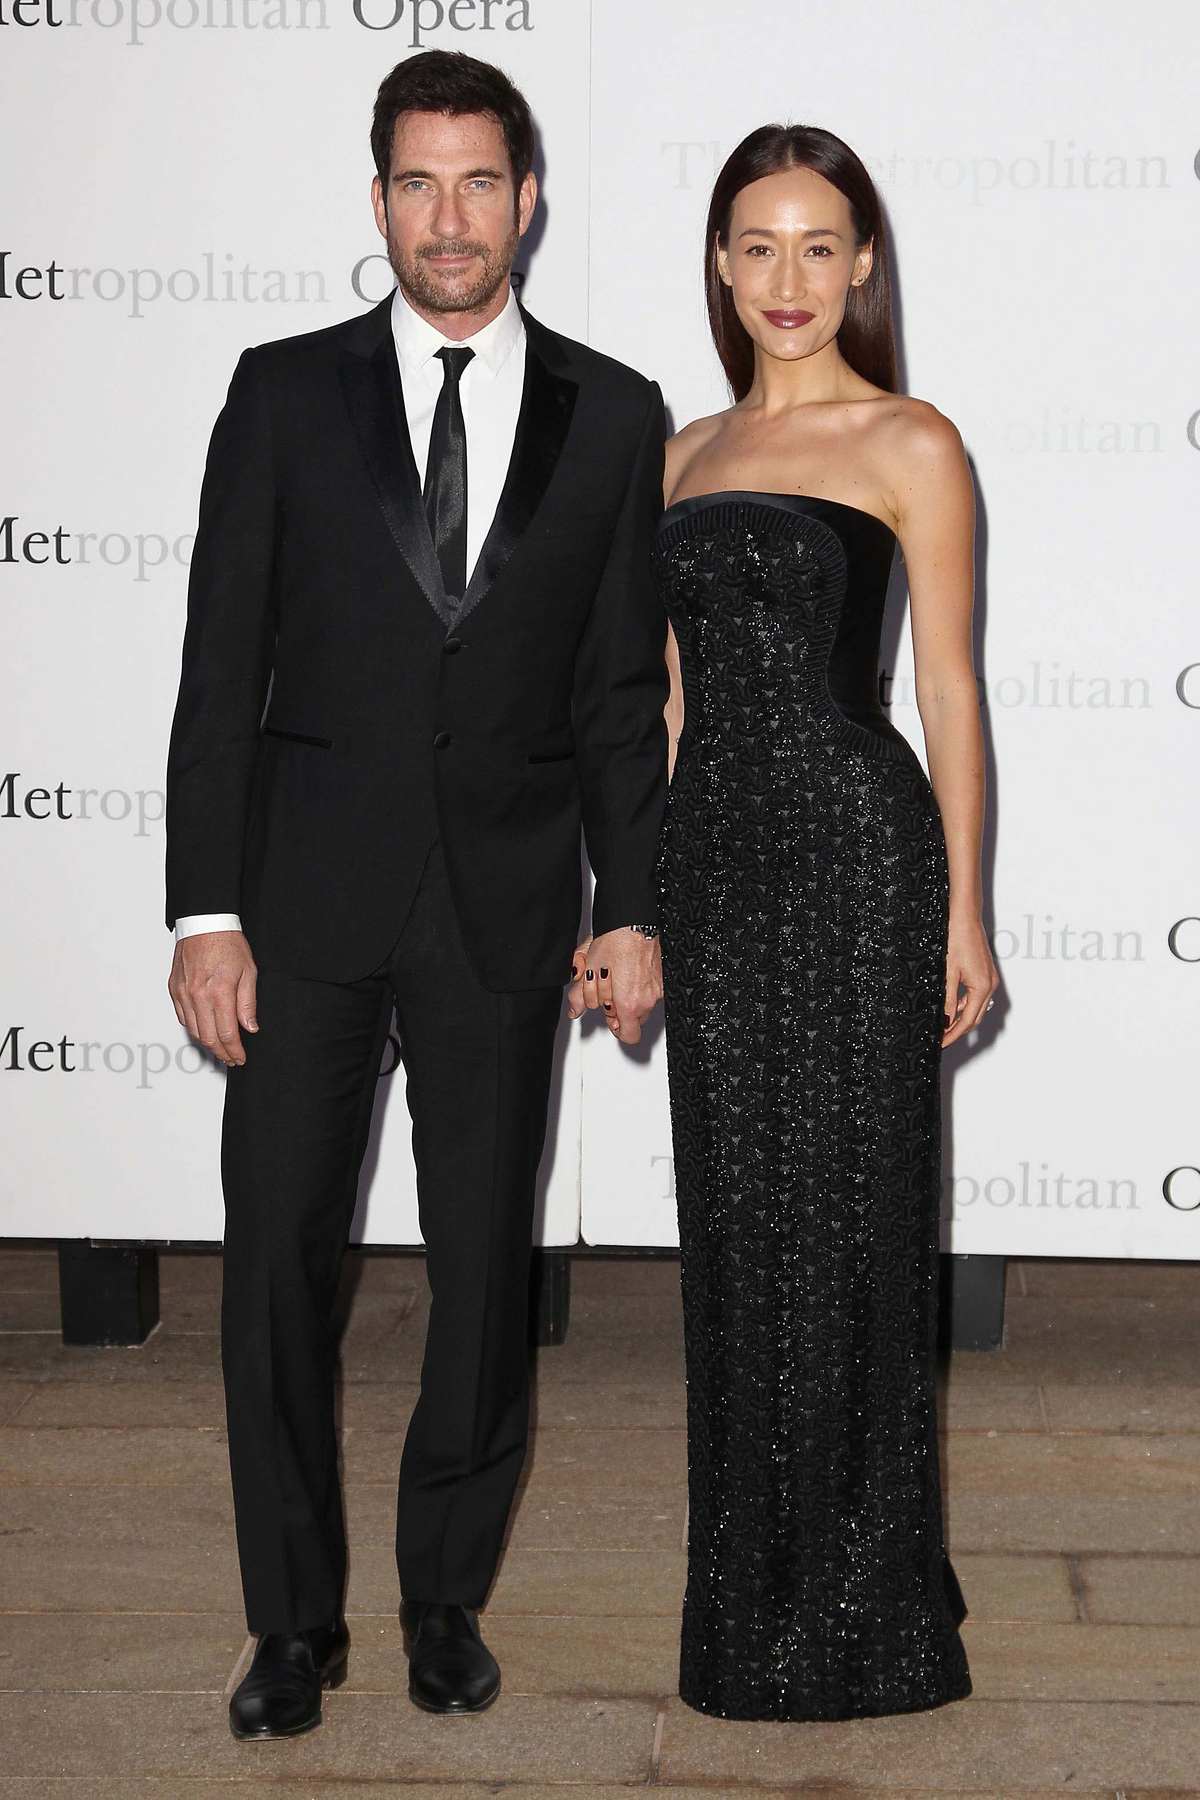 Dylan McDermott and Maggie Q at The Metropolitan Opera Season Opens with a Gala Premiere